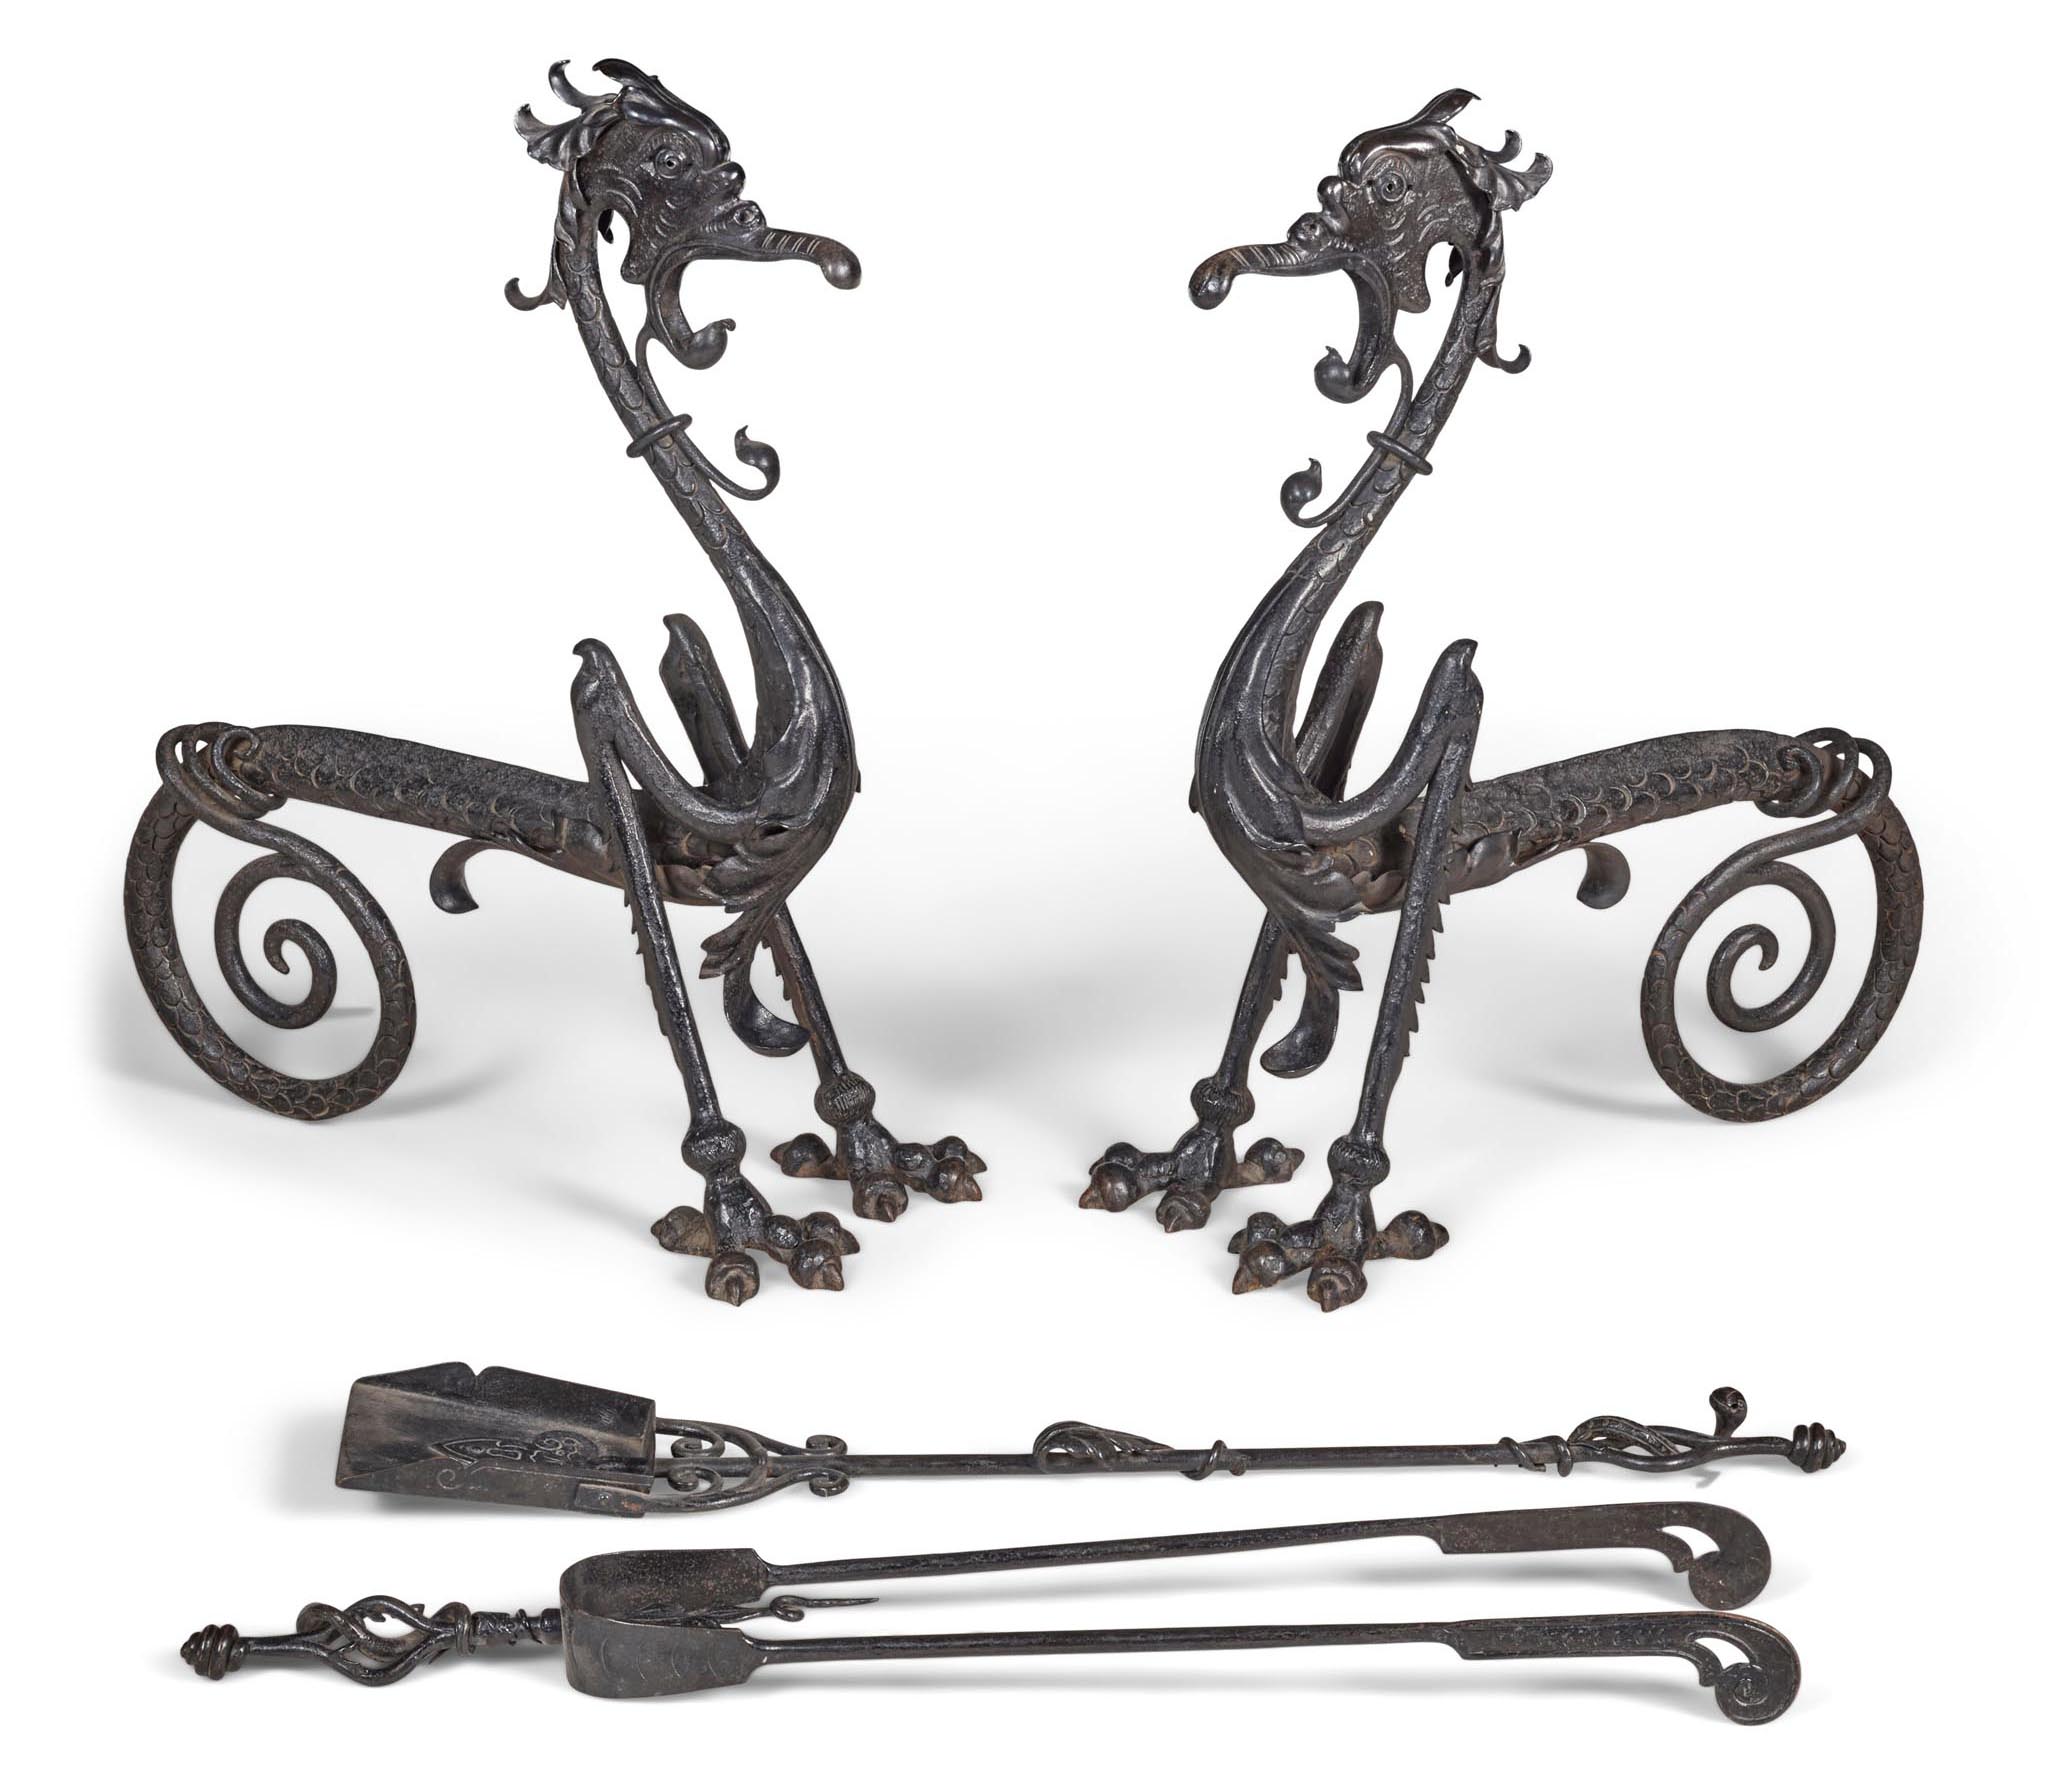 LOT 8 | PAIR OF ENGLISH GOTHIC REVIVAL WROUGHT IRON FIRE DOGS LATE 19TH CENTURY | £1,000 - £1,500 + fees